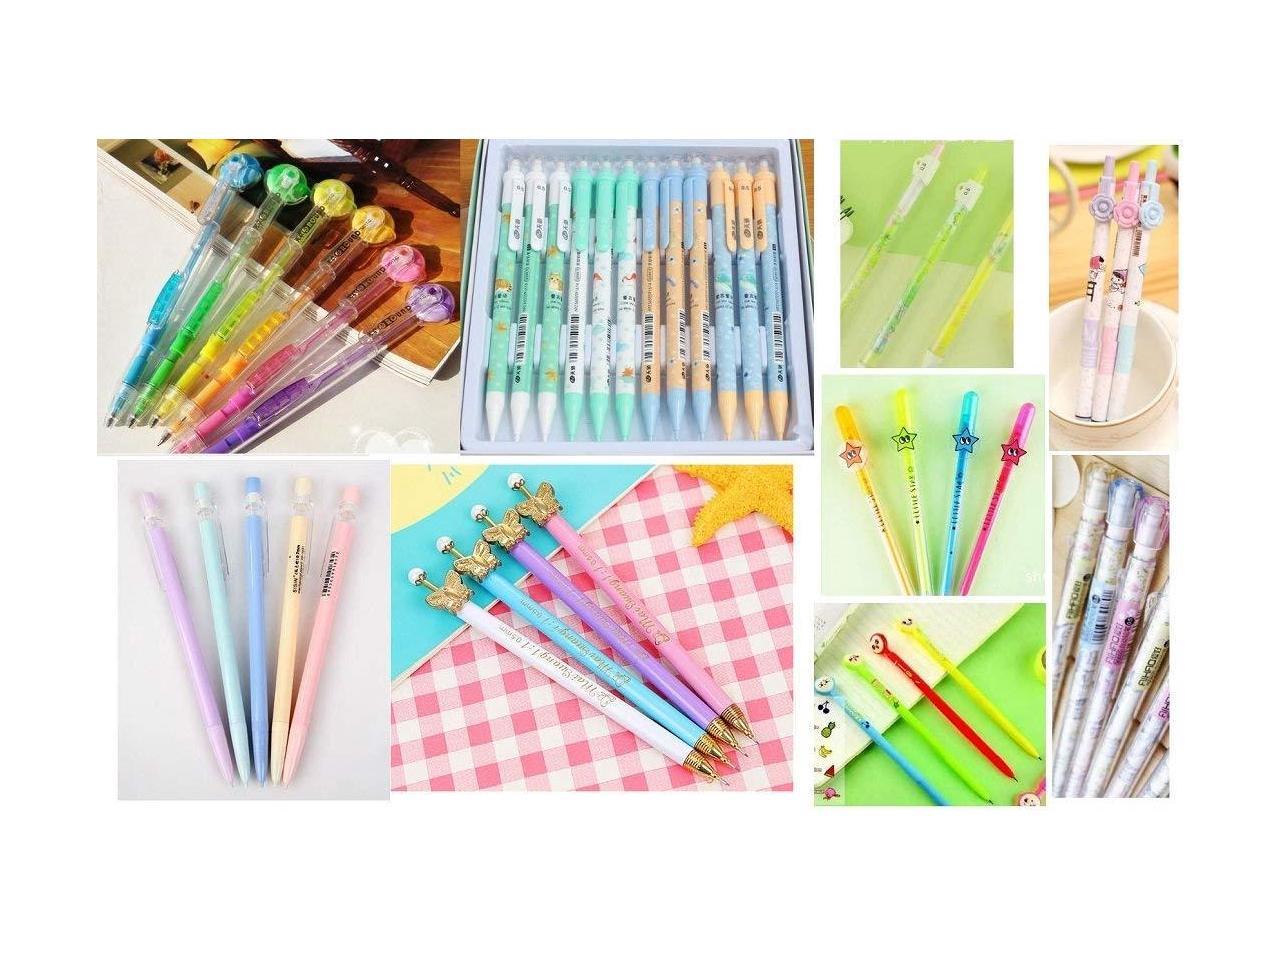 Jollin 12 Cute Korean Kawaii Mechanical Pencils With Erasers And Leading Refills Style Crown